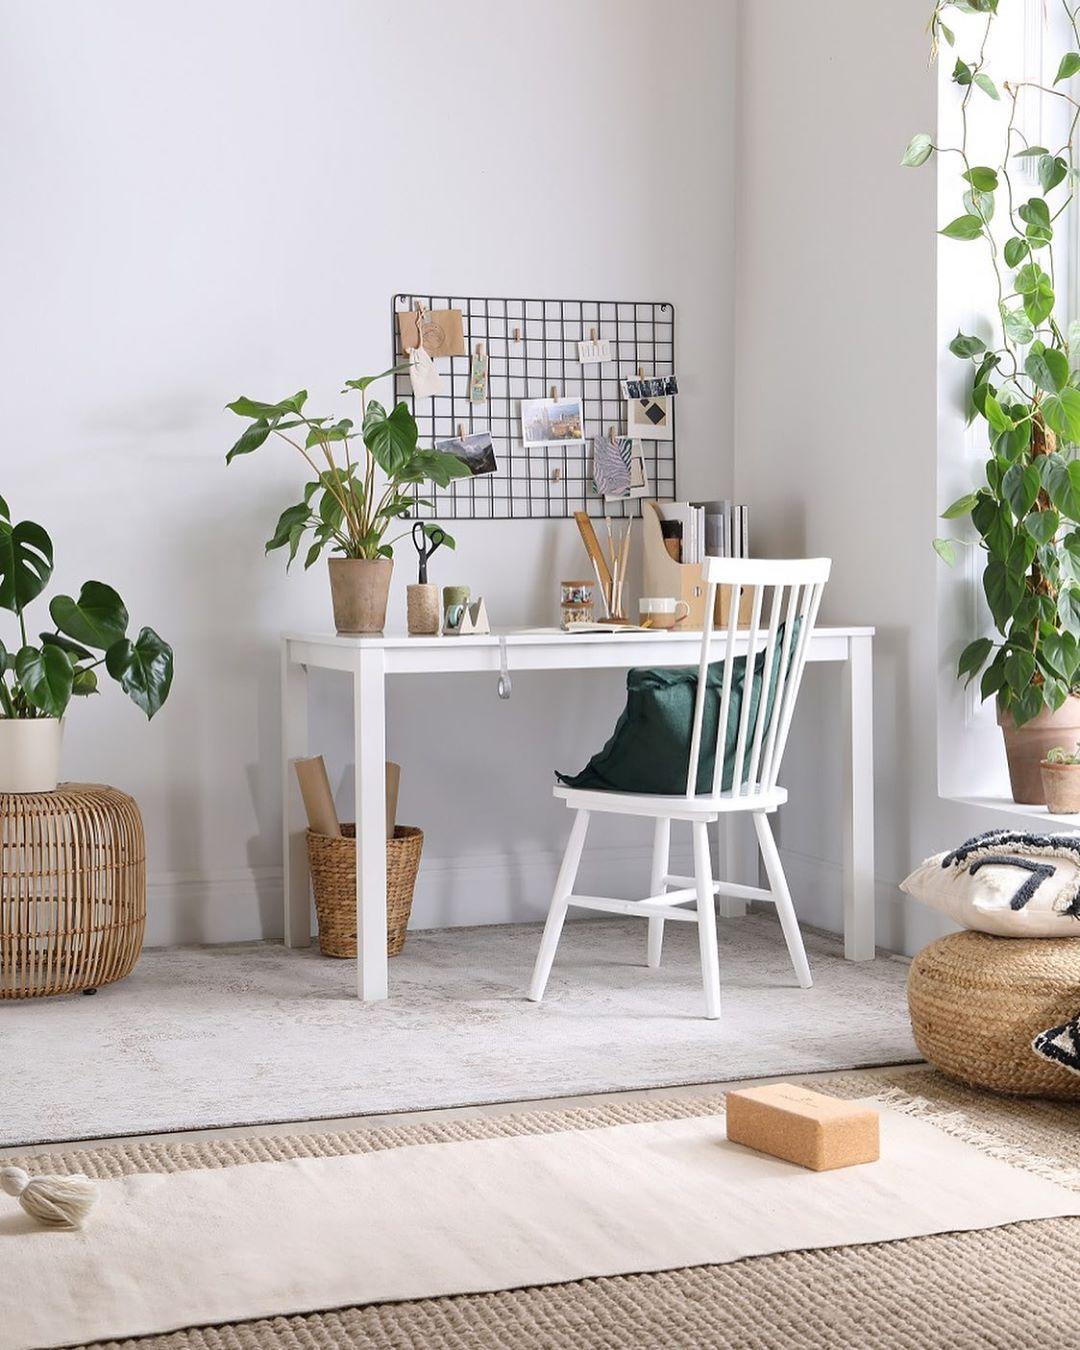 Work From Home: 3 Easy Home Office Ideas to Instantly Spark Productivity